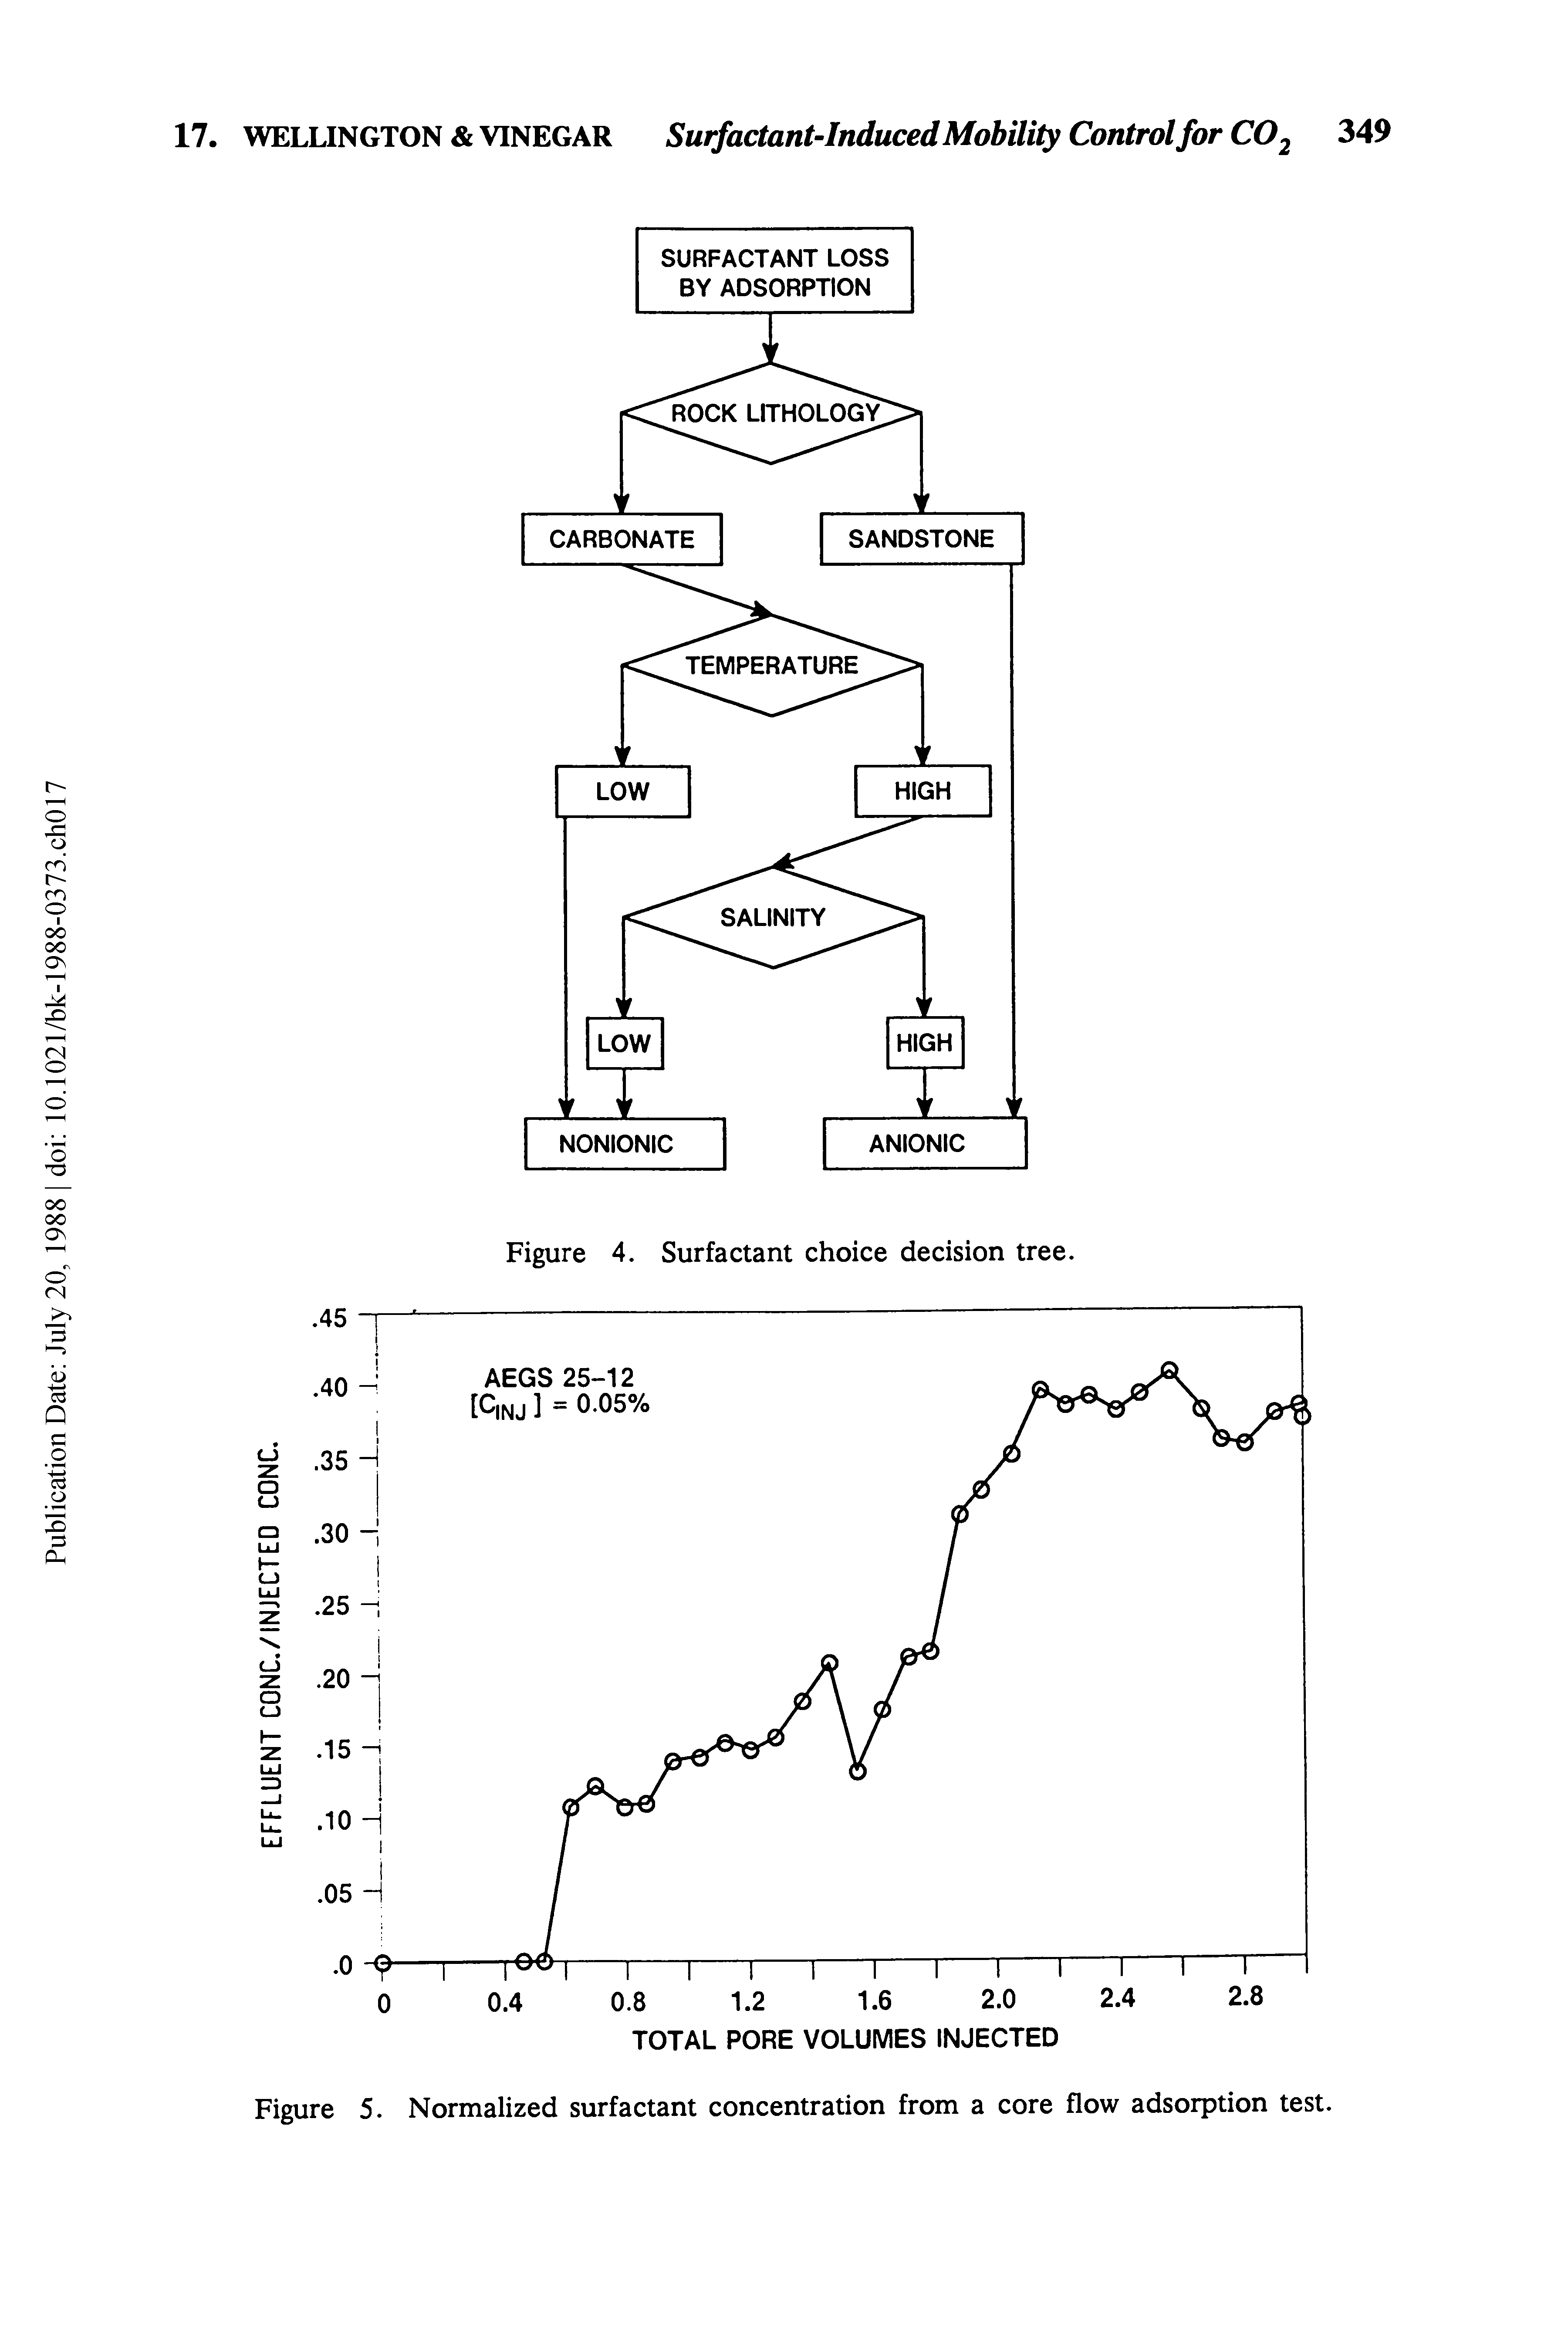 Figure 5. Normalized surfactant concentration from a core flow adsorption test.